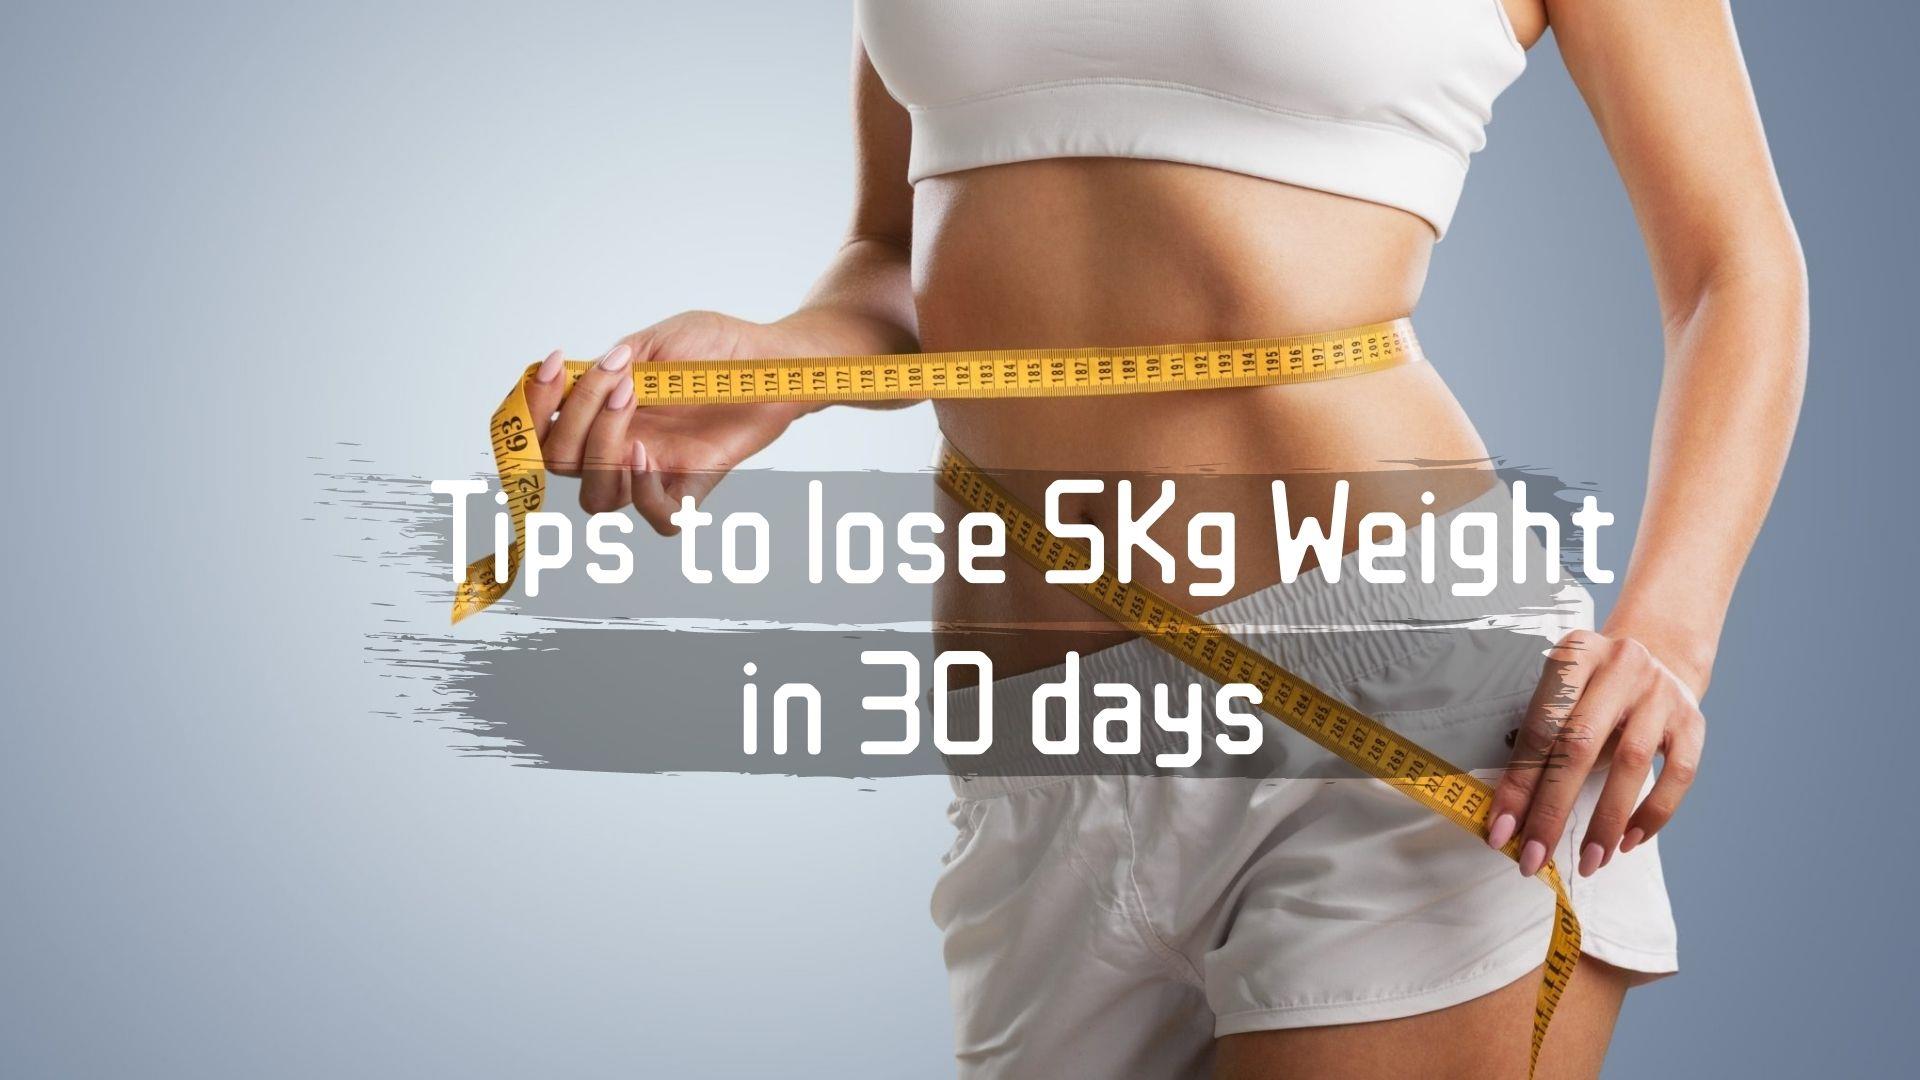 Tips to Lose Five Kg Weight in 30 Days